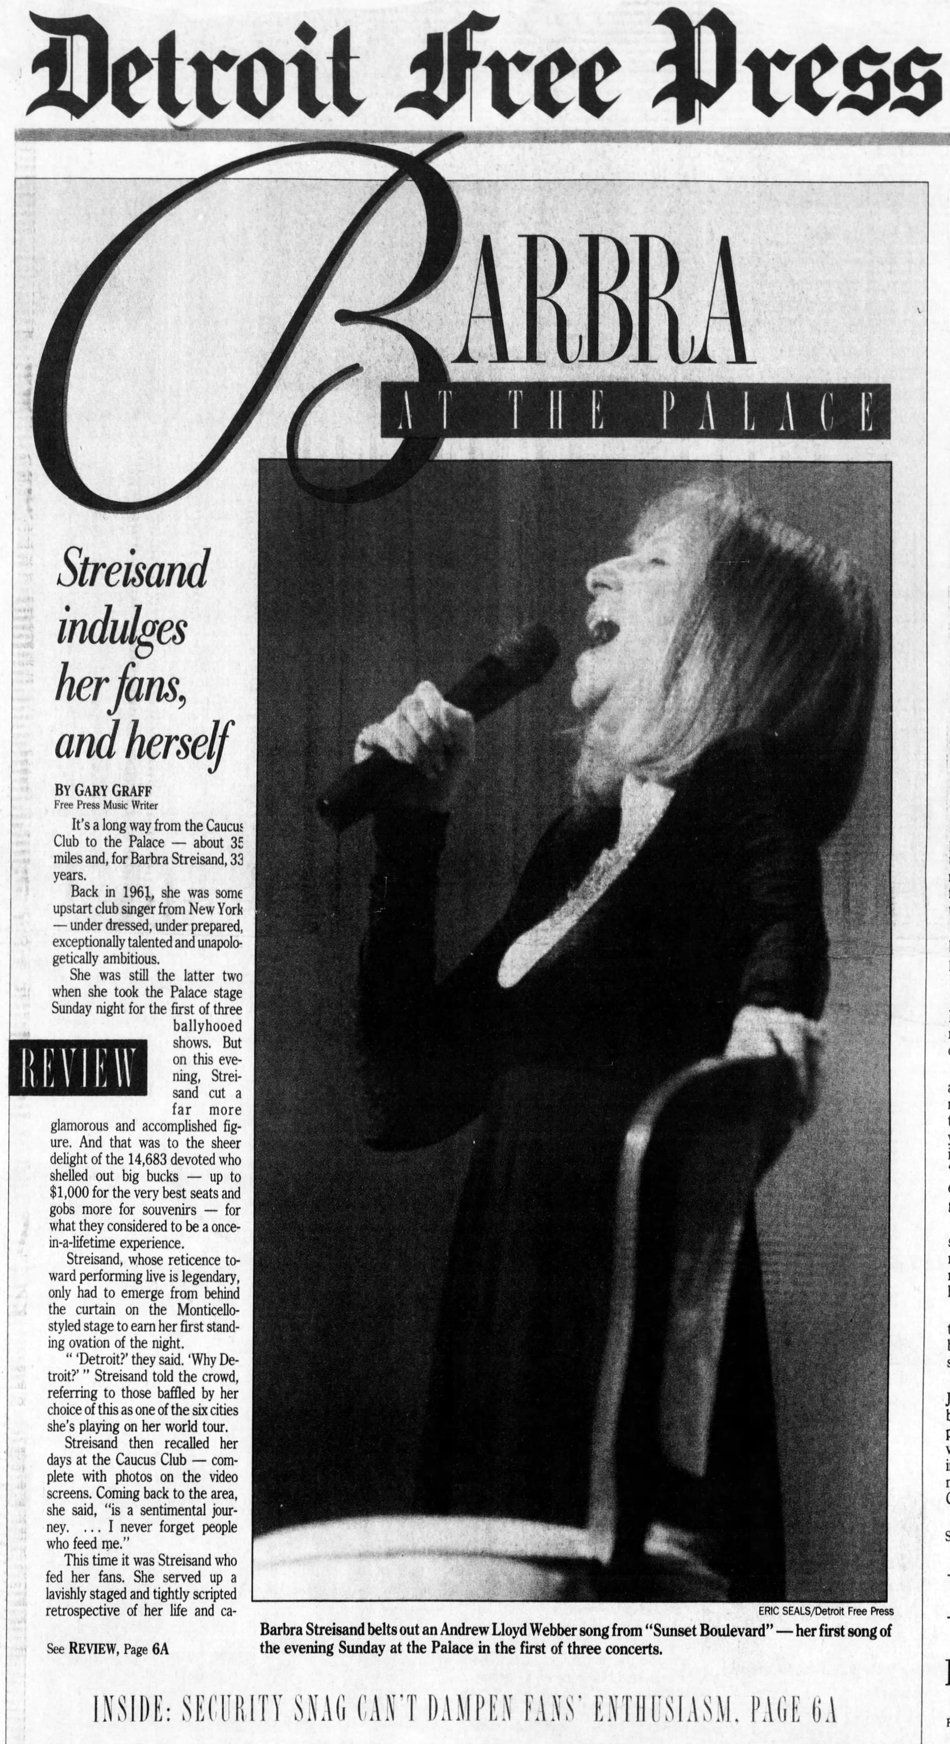 Streisand review on front cover of Detroit Free Press newspaper.